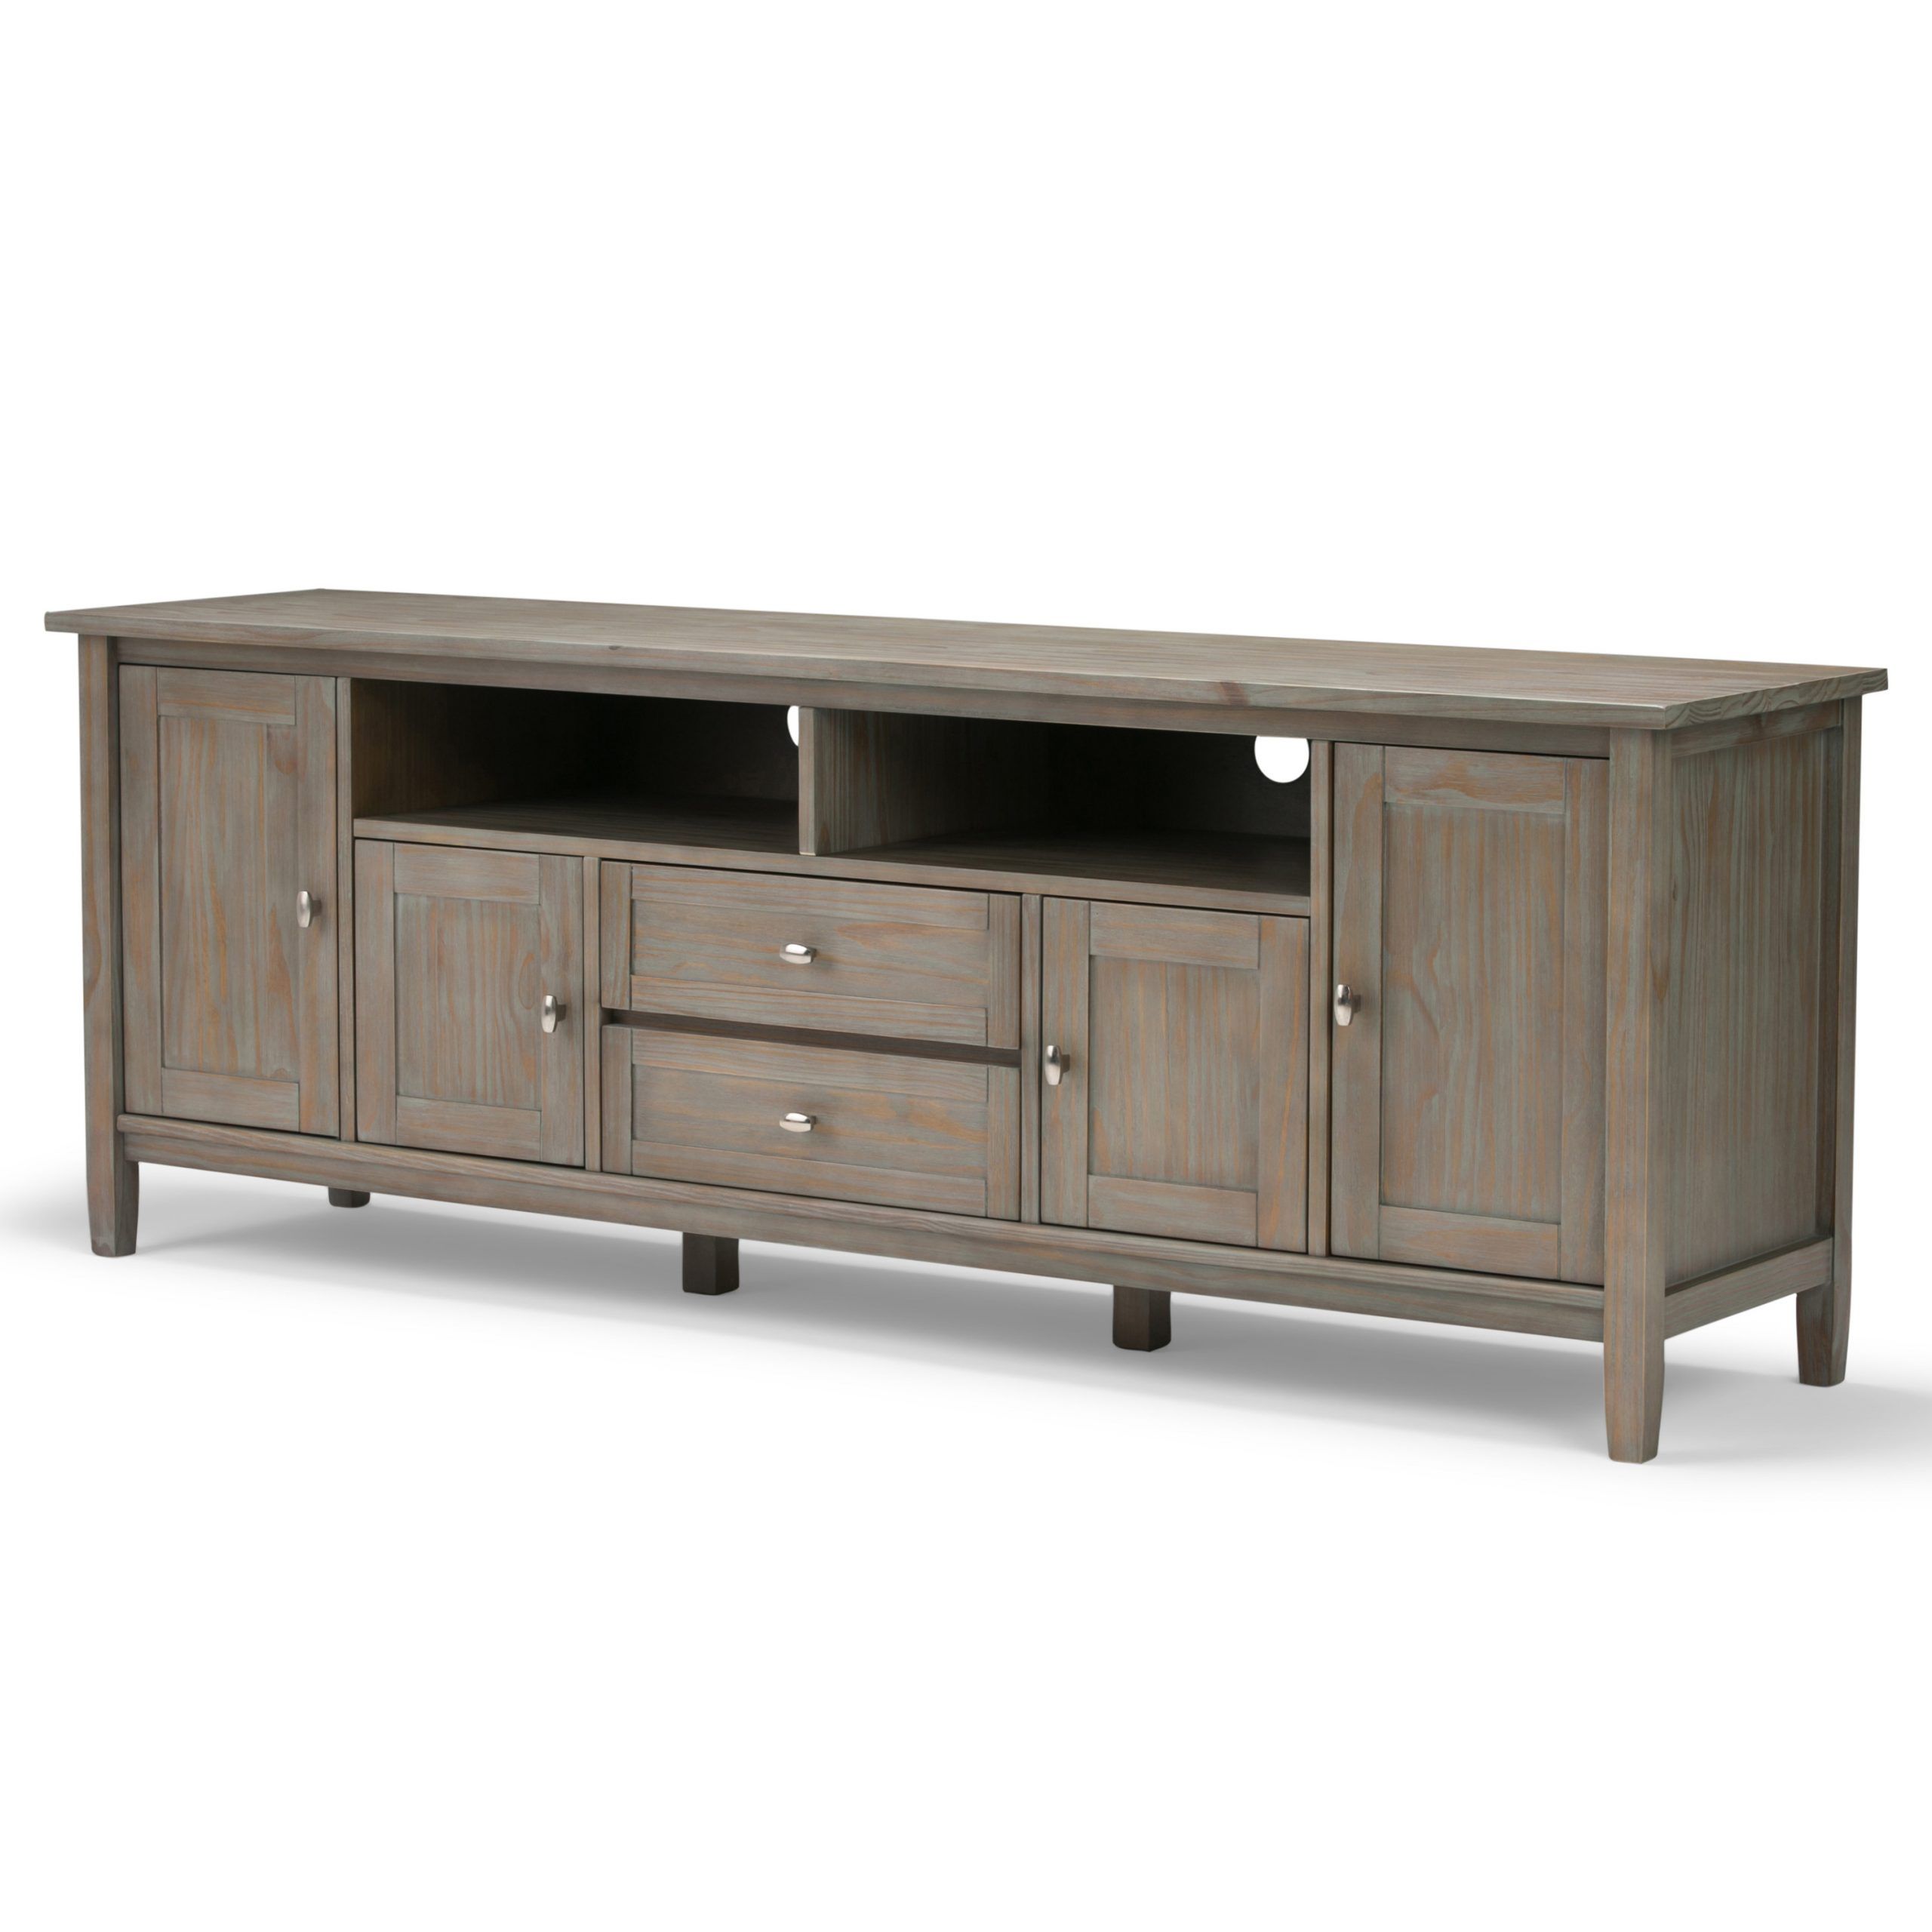 Brooklyn + Max Lexington Solid Wood 72 Inch Wide Rustic Tv Inside Wide Tv Cabinets (View 6 of 15)